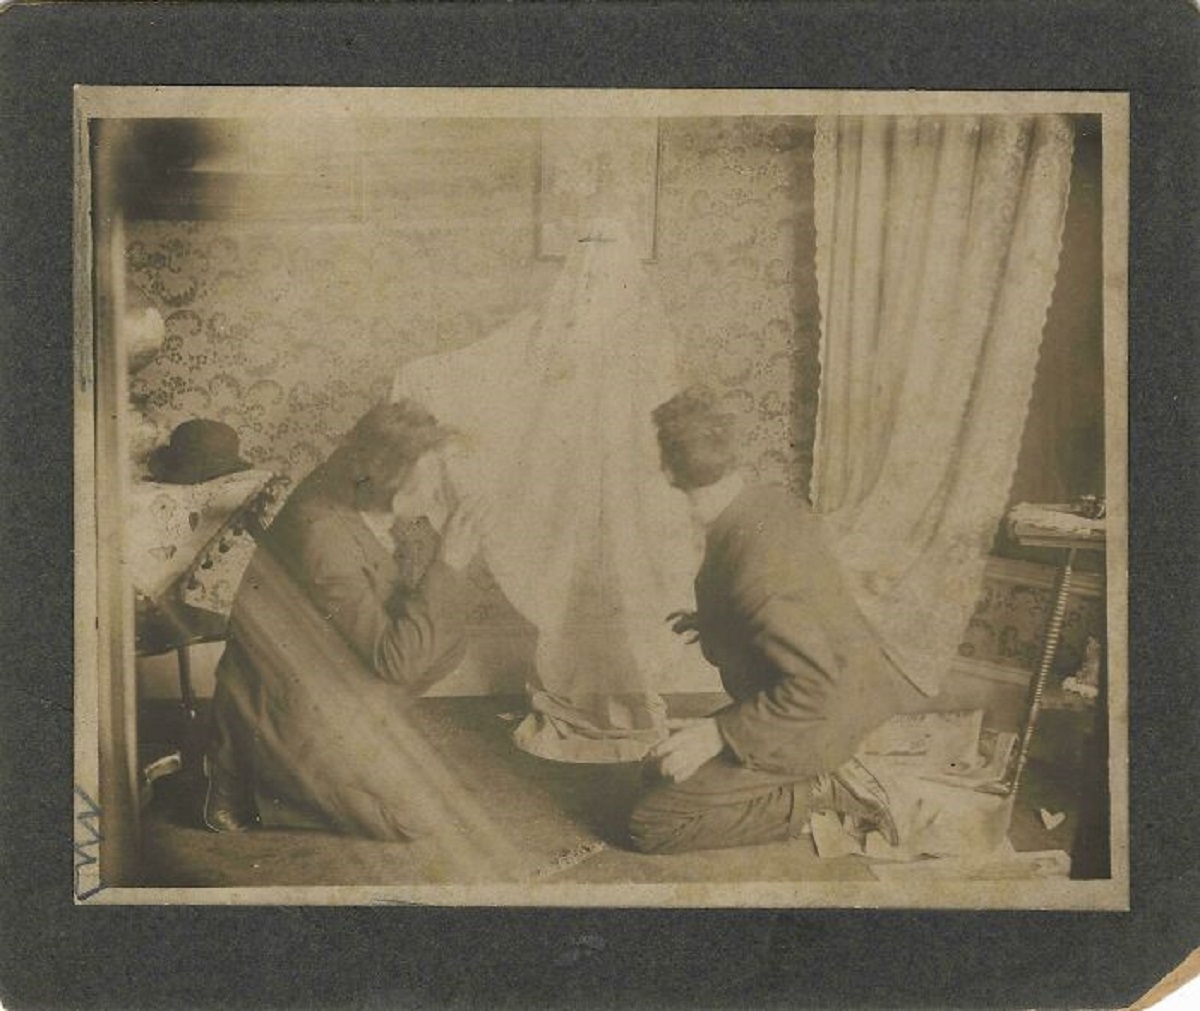 A Fake Ghost Scene Taken By Two Brothers, Circa 1900s-1910s